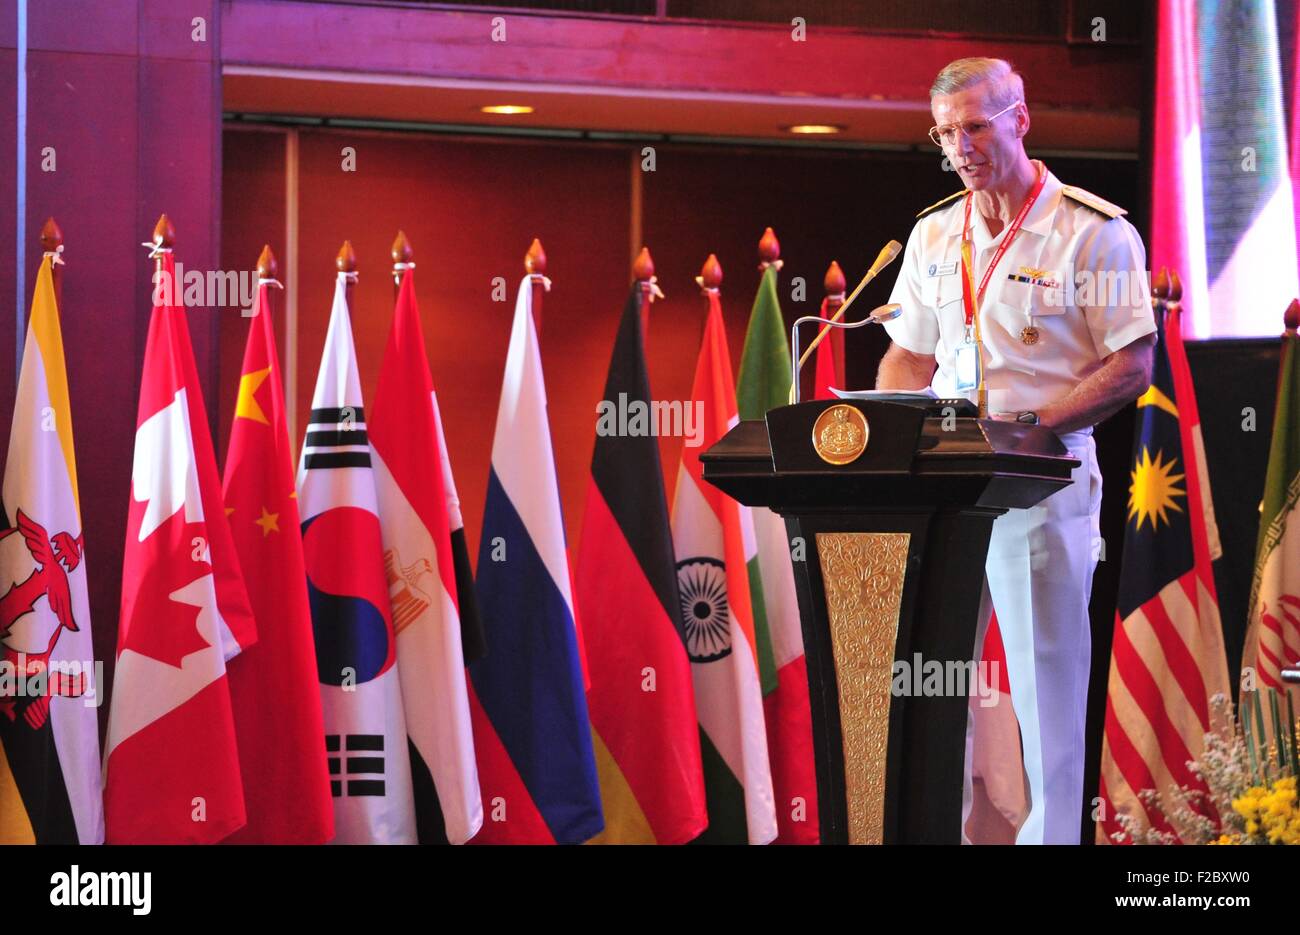 Jakarta, Indonesia. 16th Sep, 2015. Commander of the U.S. 7th Fleet Joseph P. Aucoin delivers a speech during the 2nd International Maritime Security Symposium in Jakarta, Indonesia, Sept. 16, 2015. Navy officials from 42 countries and regions attended the symposium with the theme of 'Maritime Confidence Building and Mutual Cooperation for Peace and Prosperity' from Sept. 16 to 17. Credit:  Zulkarnain/Xinhua/Alamy Live News Stock Photo